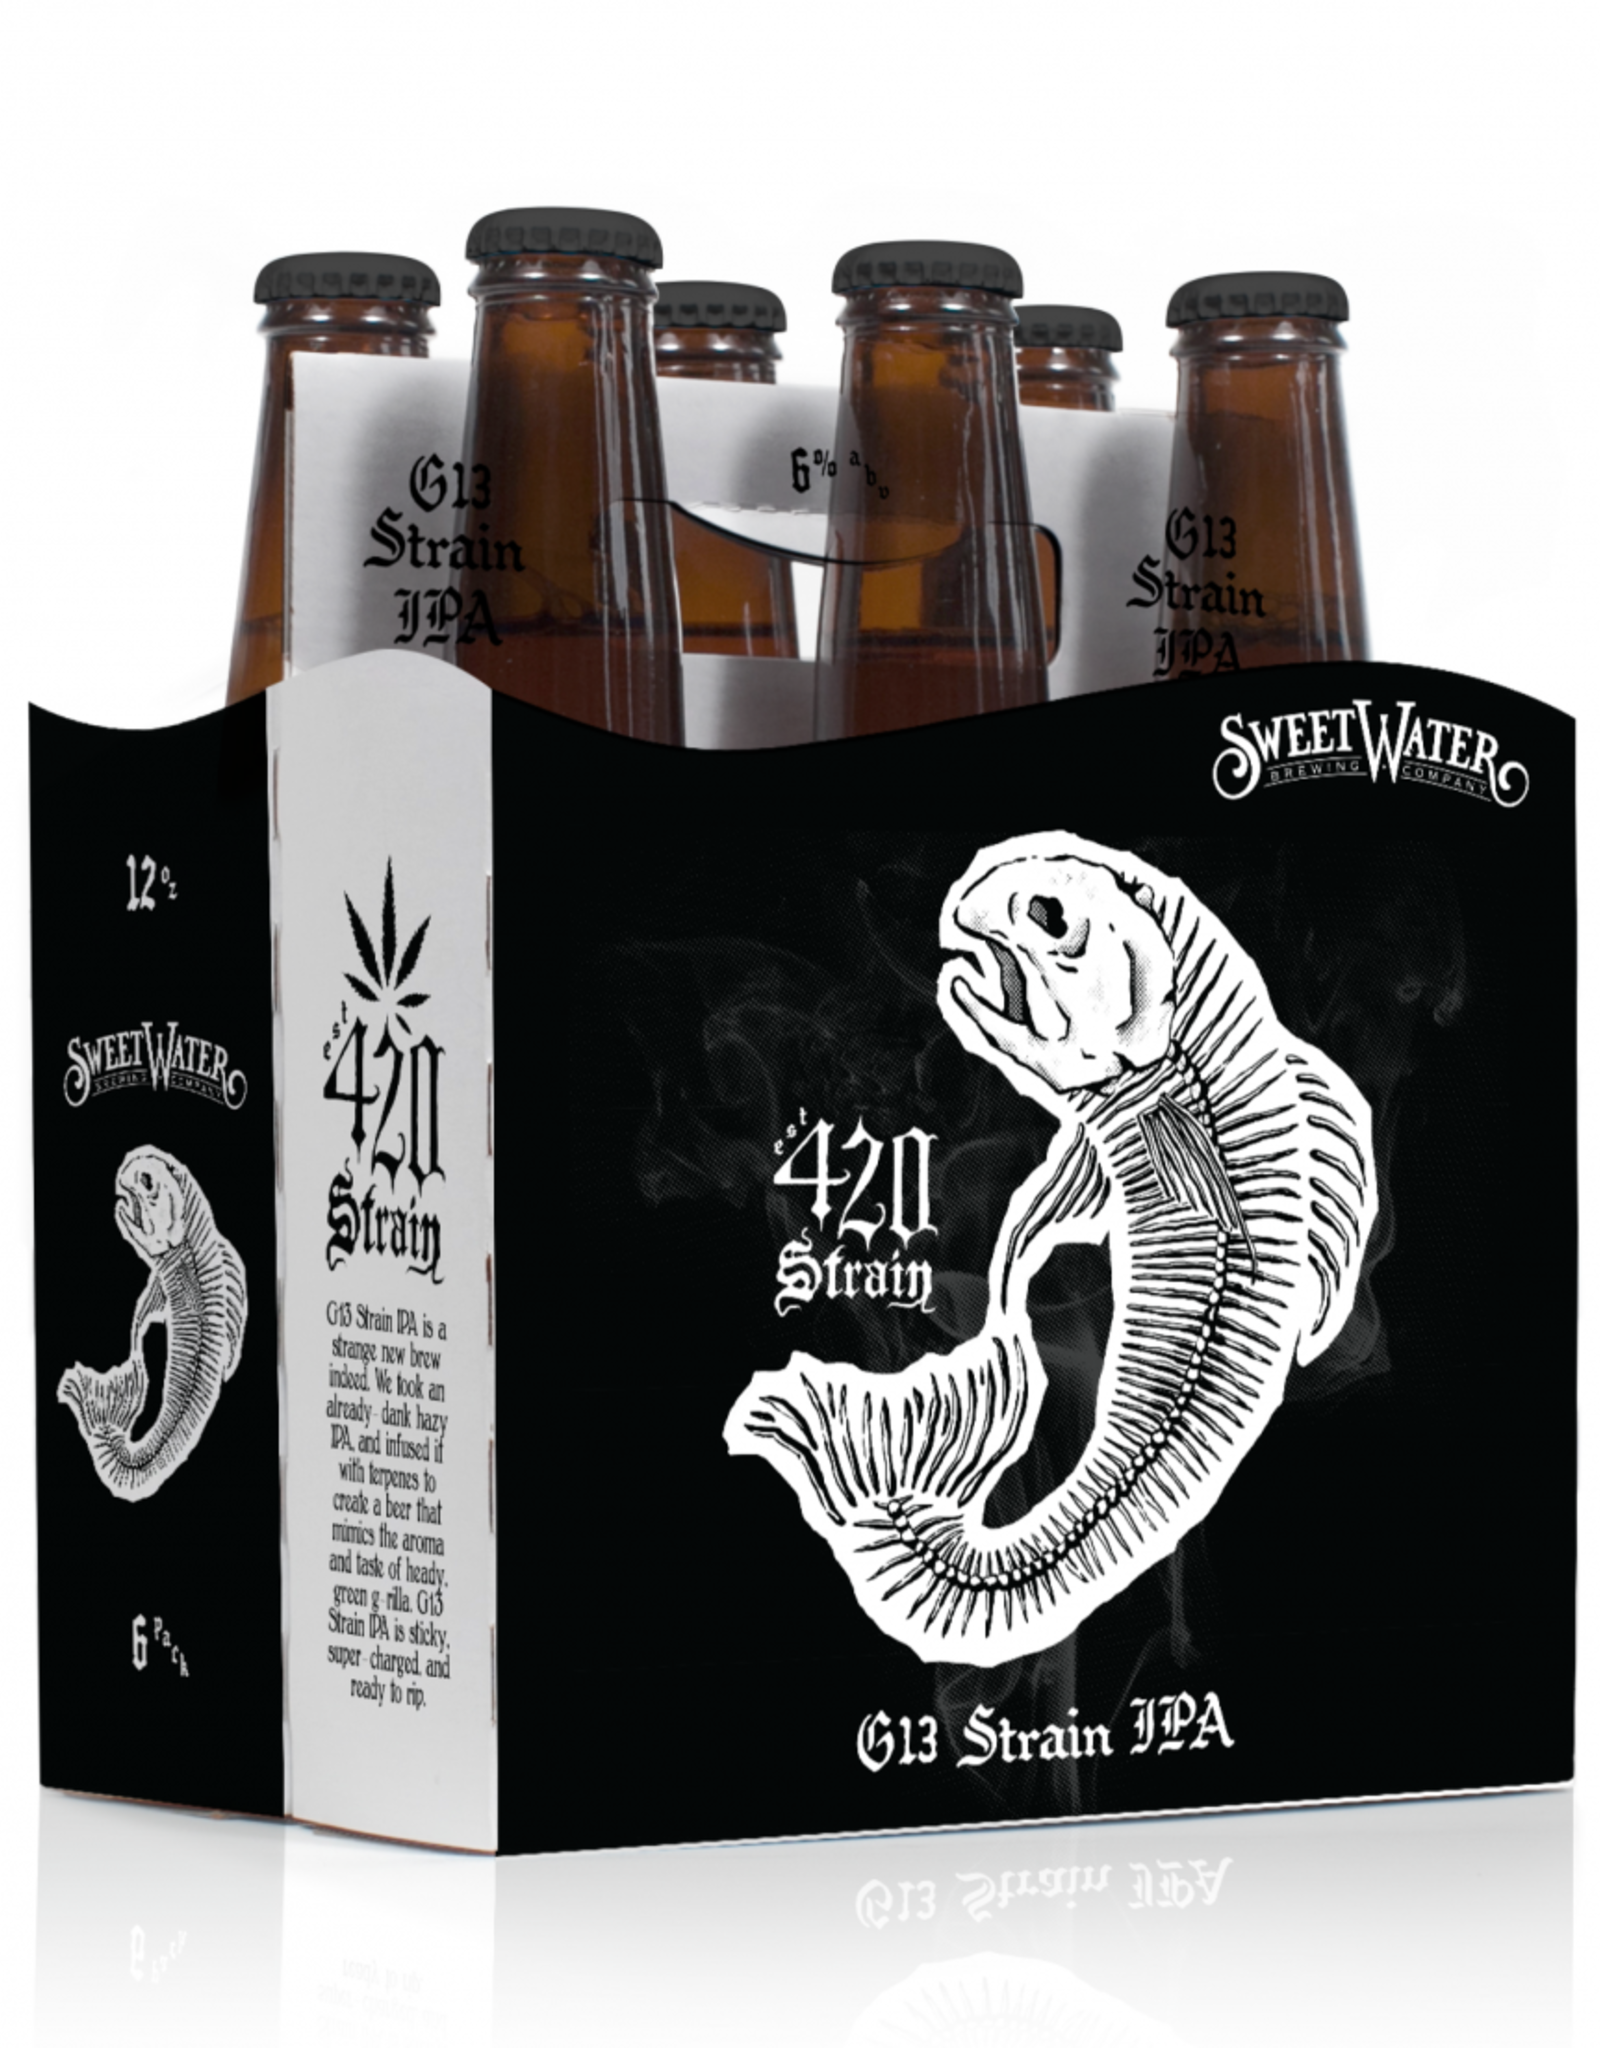 SweetWater 420 Strain G13 IPA 6x12 oz cans